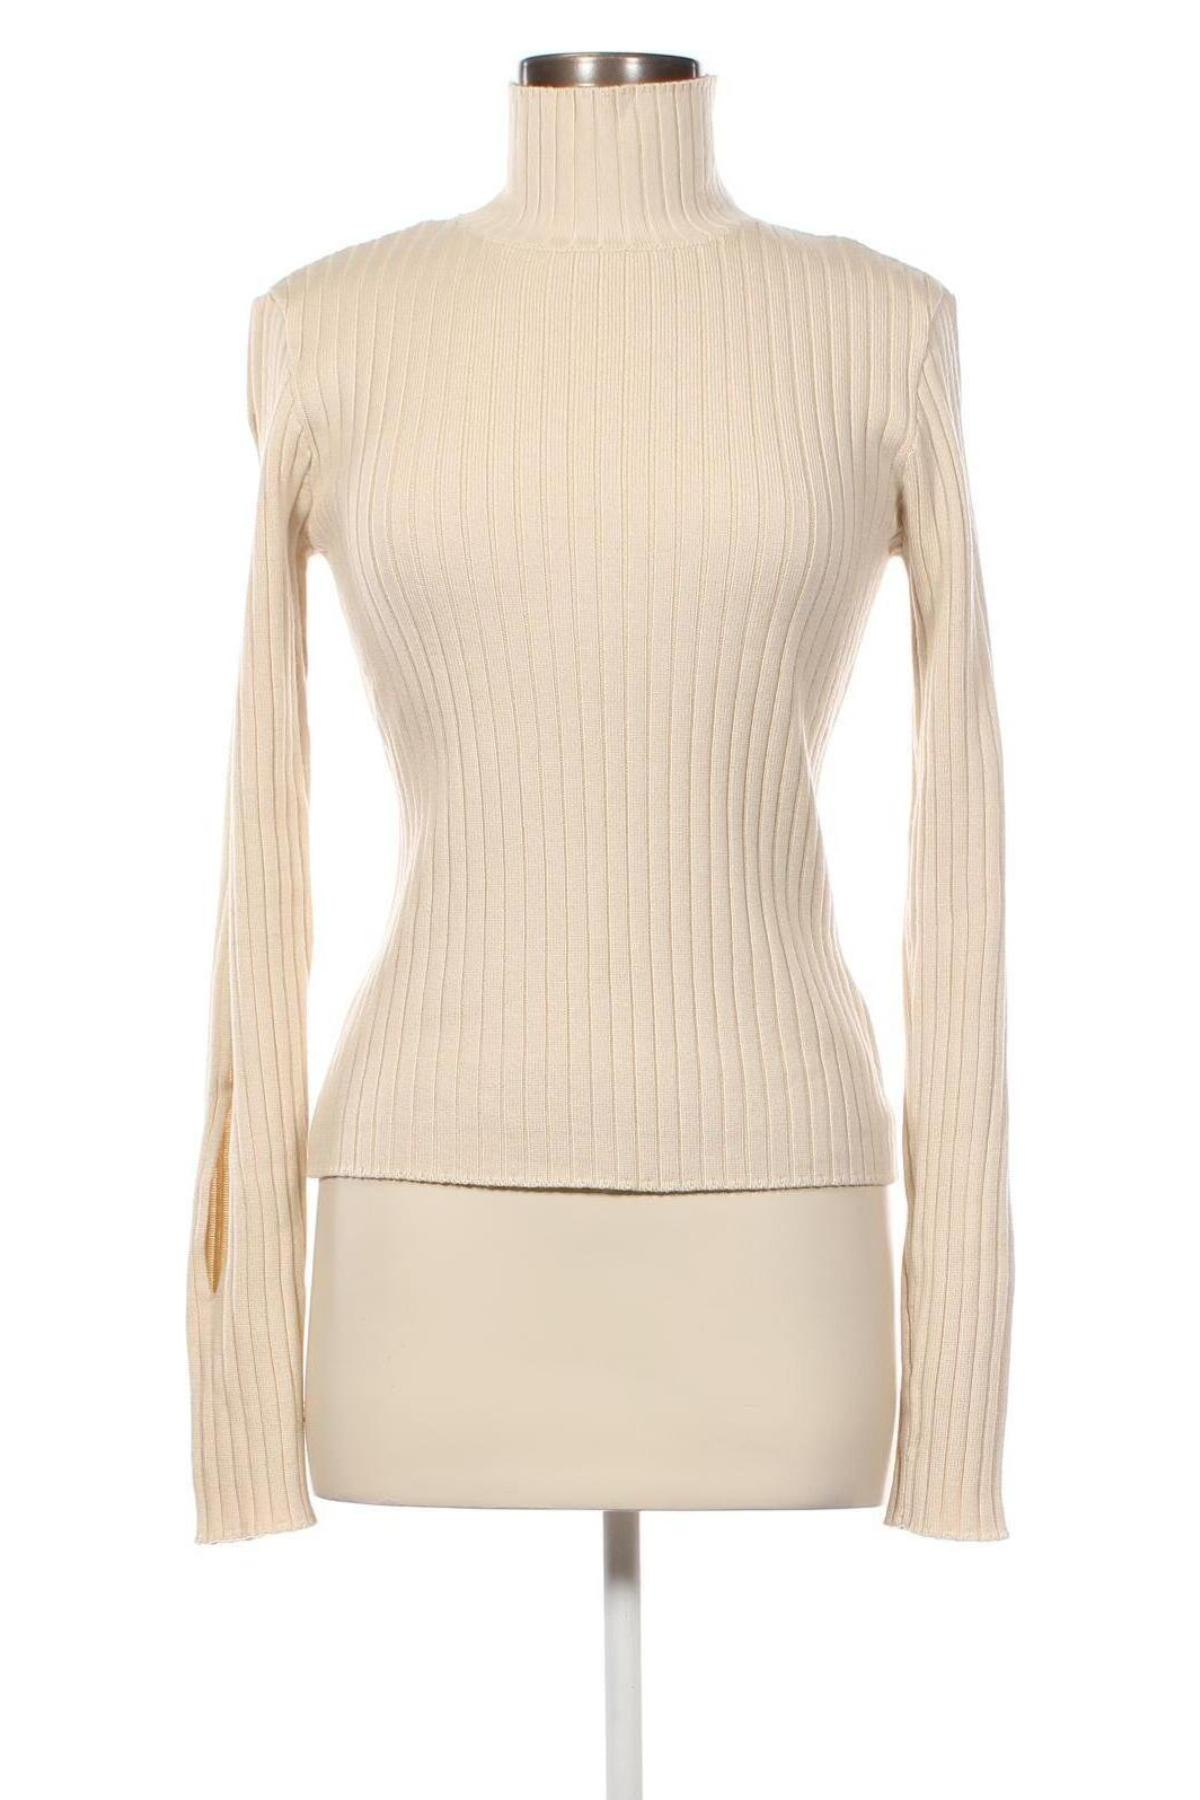 Damenpullover Katy Perry exclusive for ABOUT YOU, Größe M, Farbe Beige, Preis 28,76 €